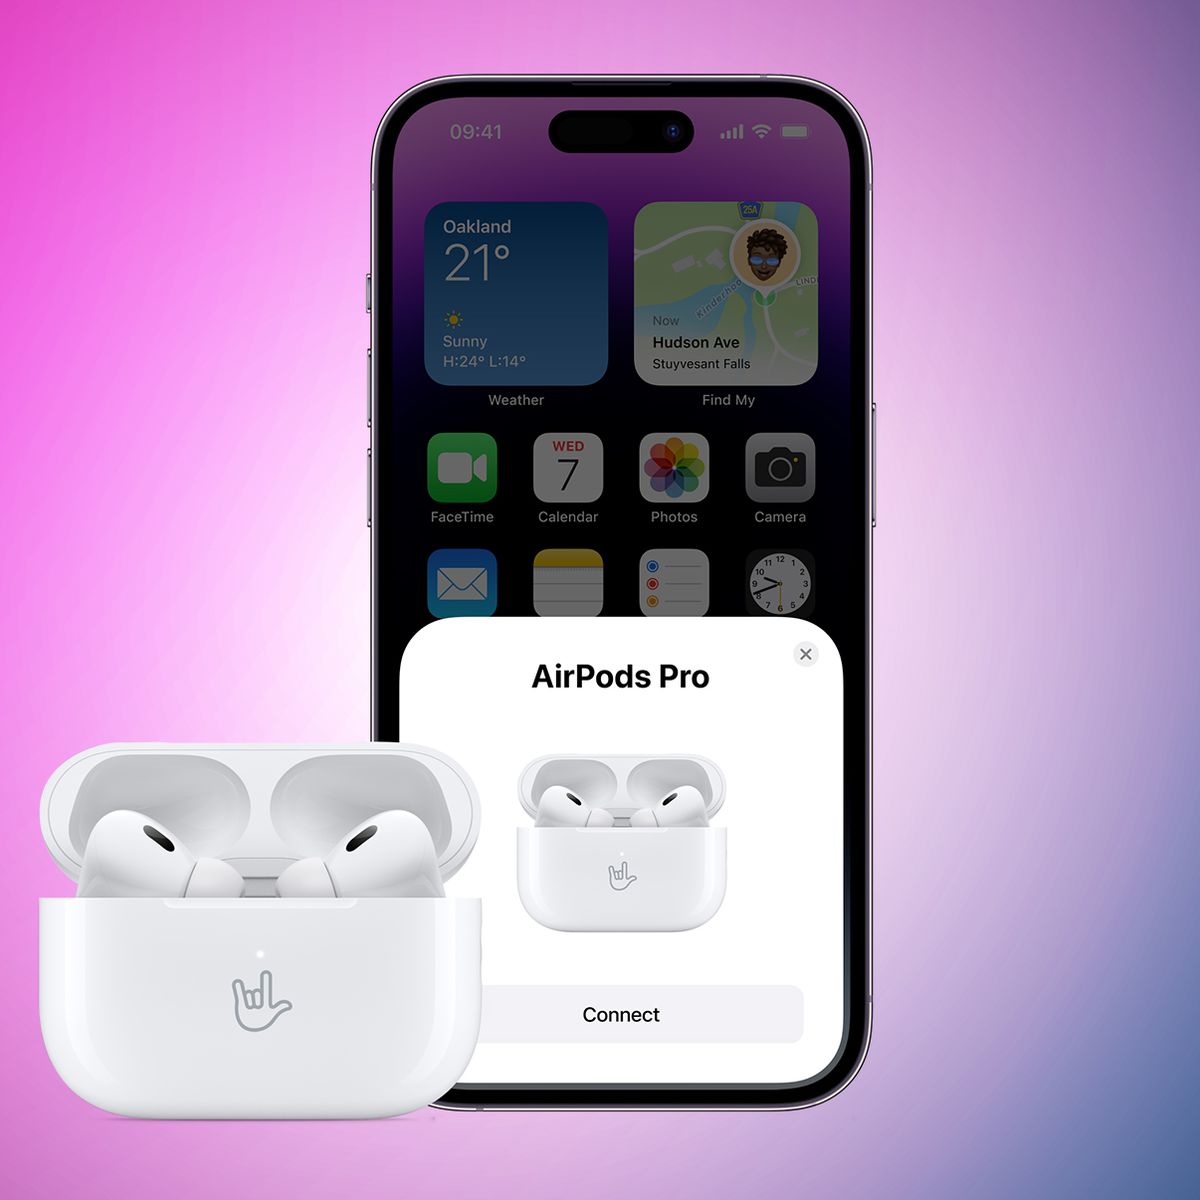 AirPods Max orders delayed 2-3 weeks, will Apple release new colors?